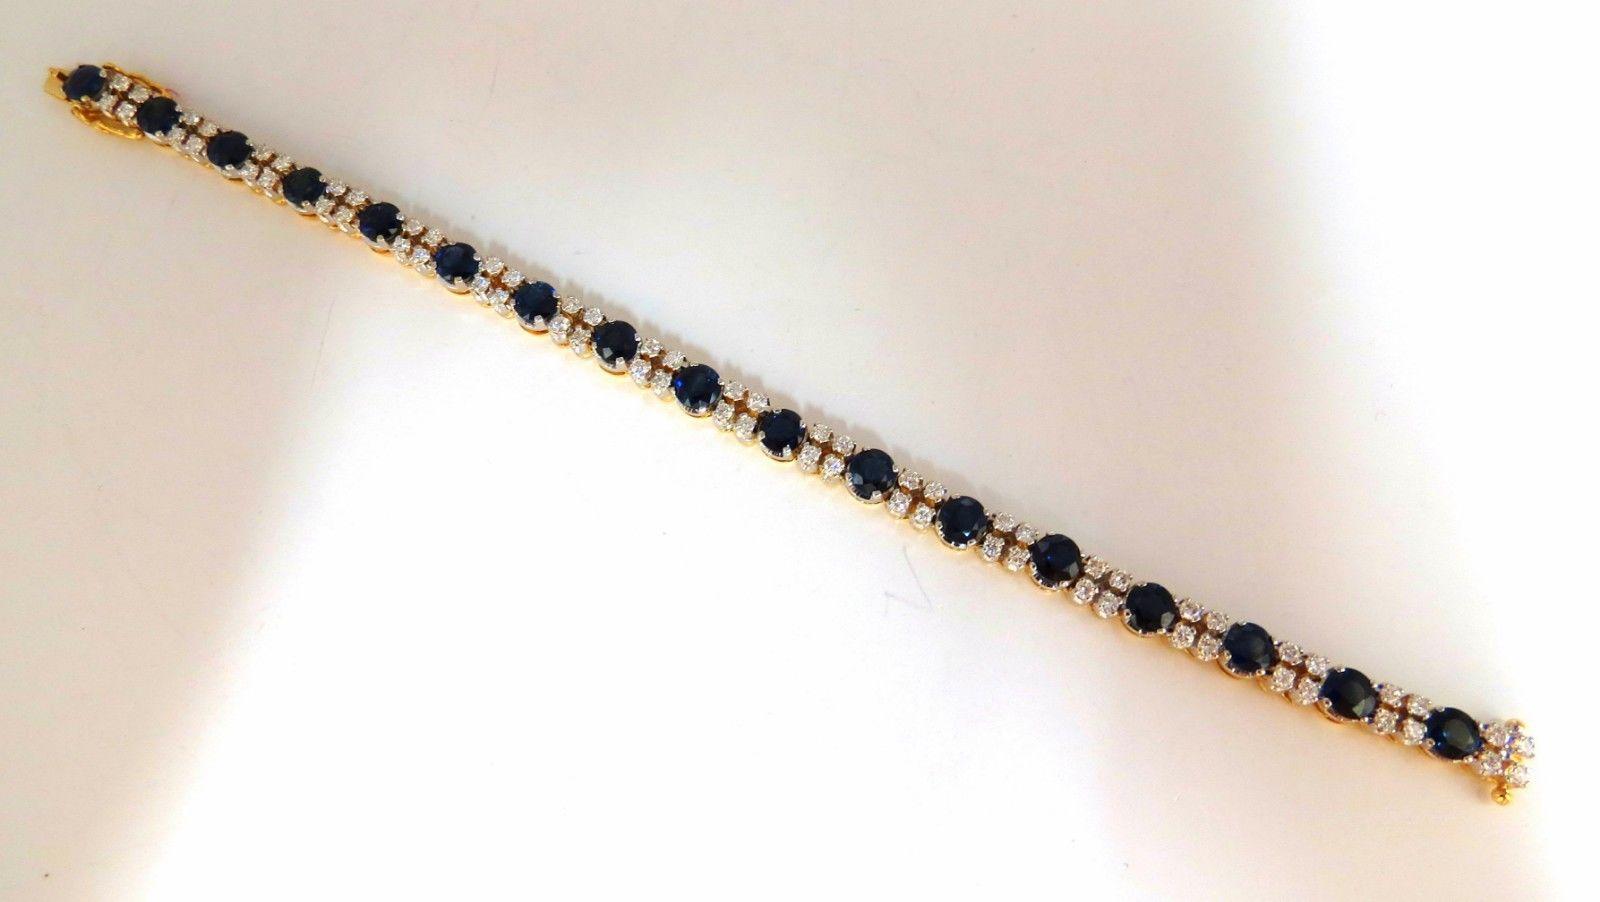 Gem Line Bracelet
10.00ct Classic Natural color sapphire 

diamonds tennis bracelet.

Very High Grade, Clean clarity

2.50ct. Round Diamonds 


H -color vs-2 clarity

Full cuts and brilliant



Sapphires are of clean clarity 
Transparent and full